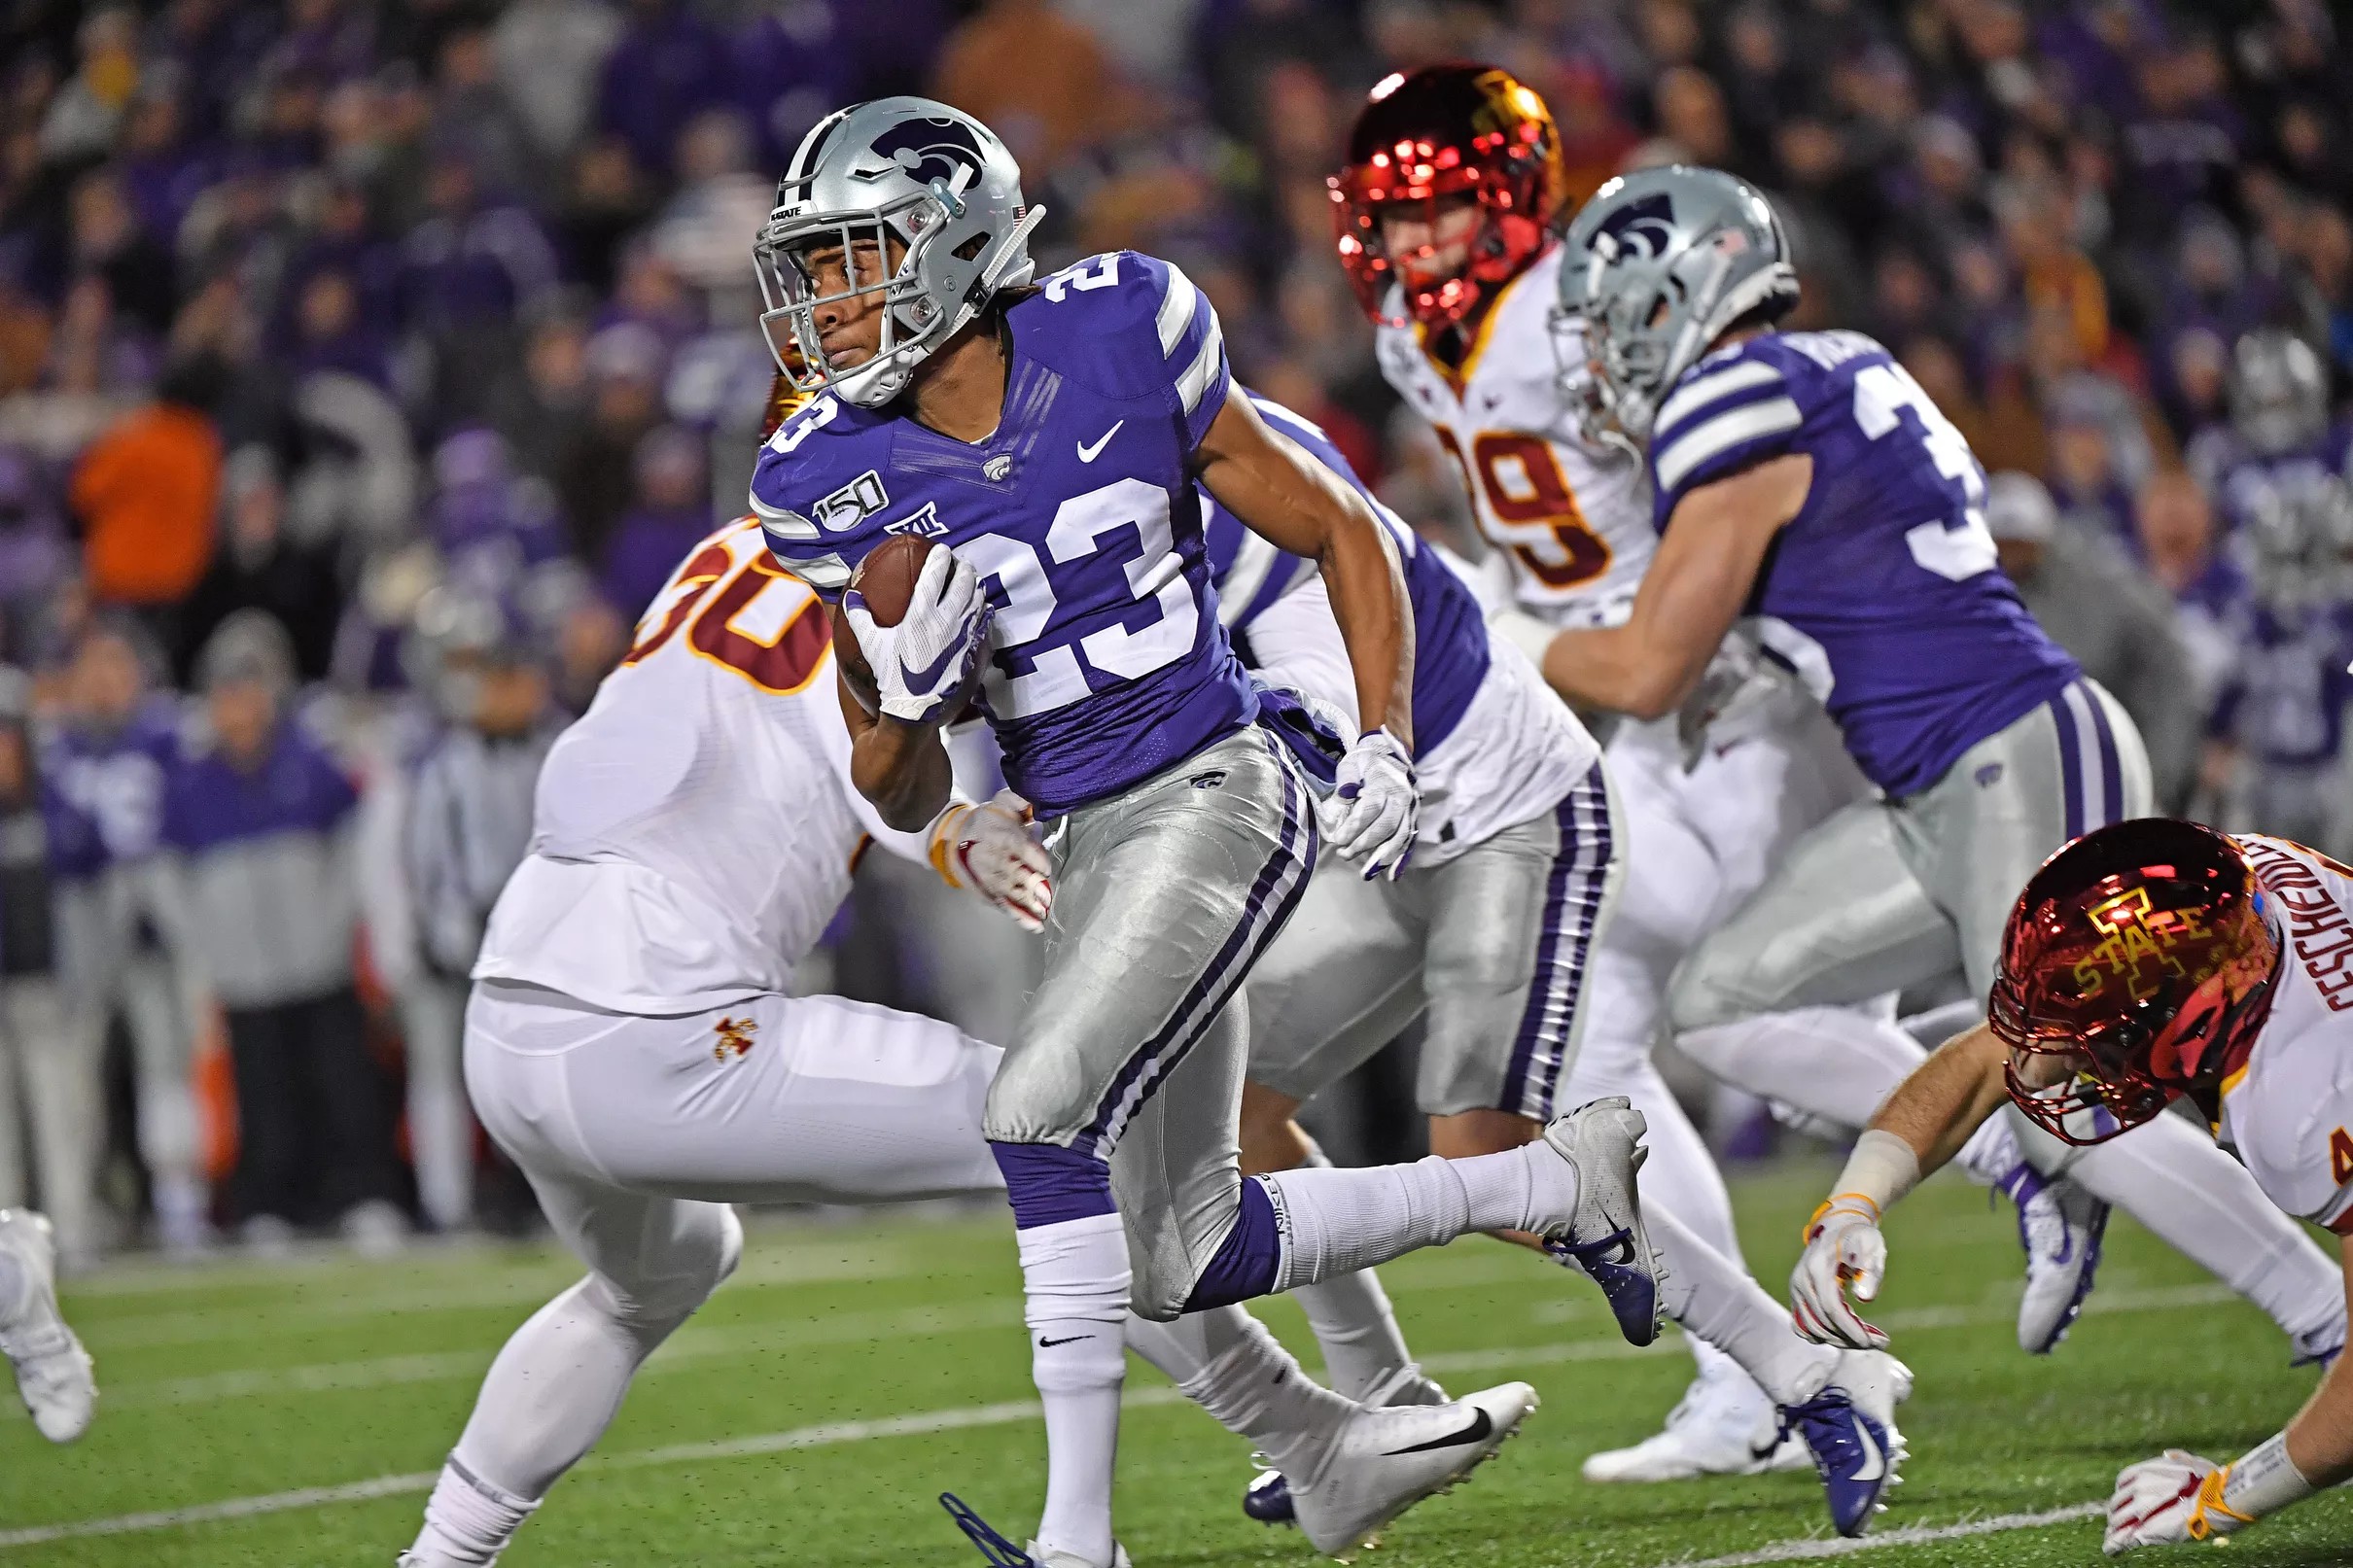 K-State Football: What’s Up With all the Transfers?